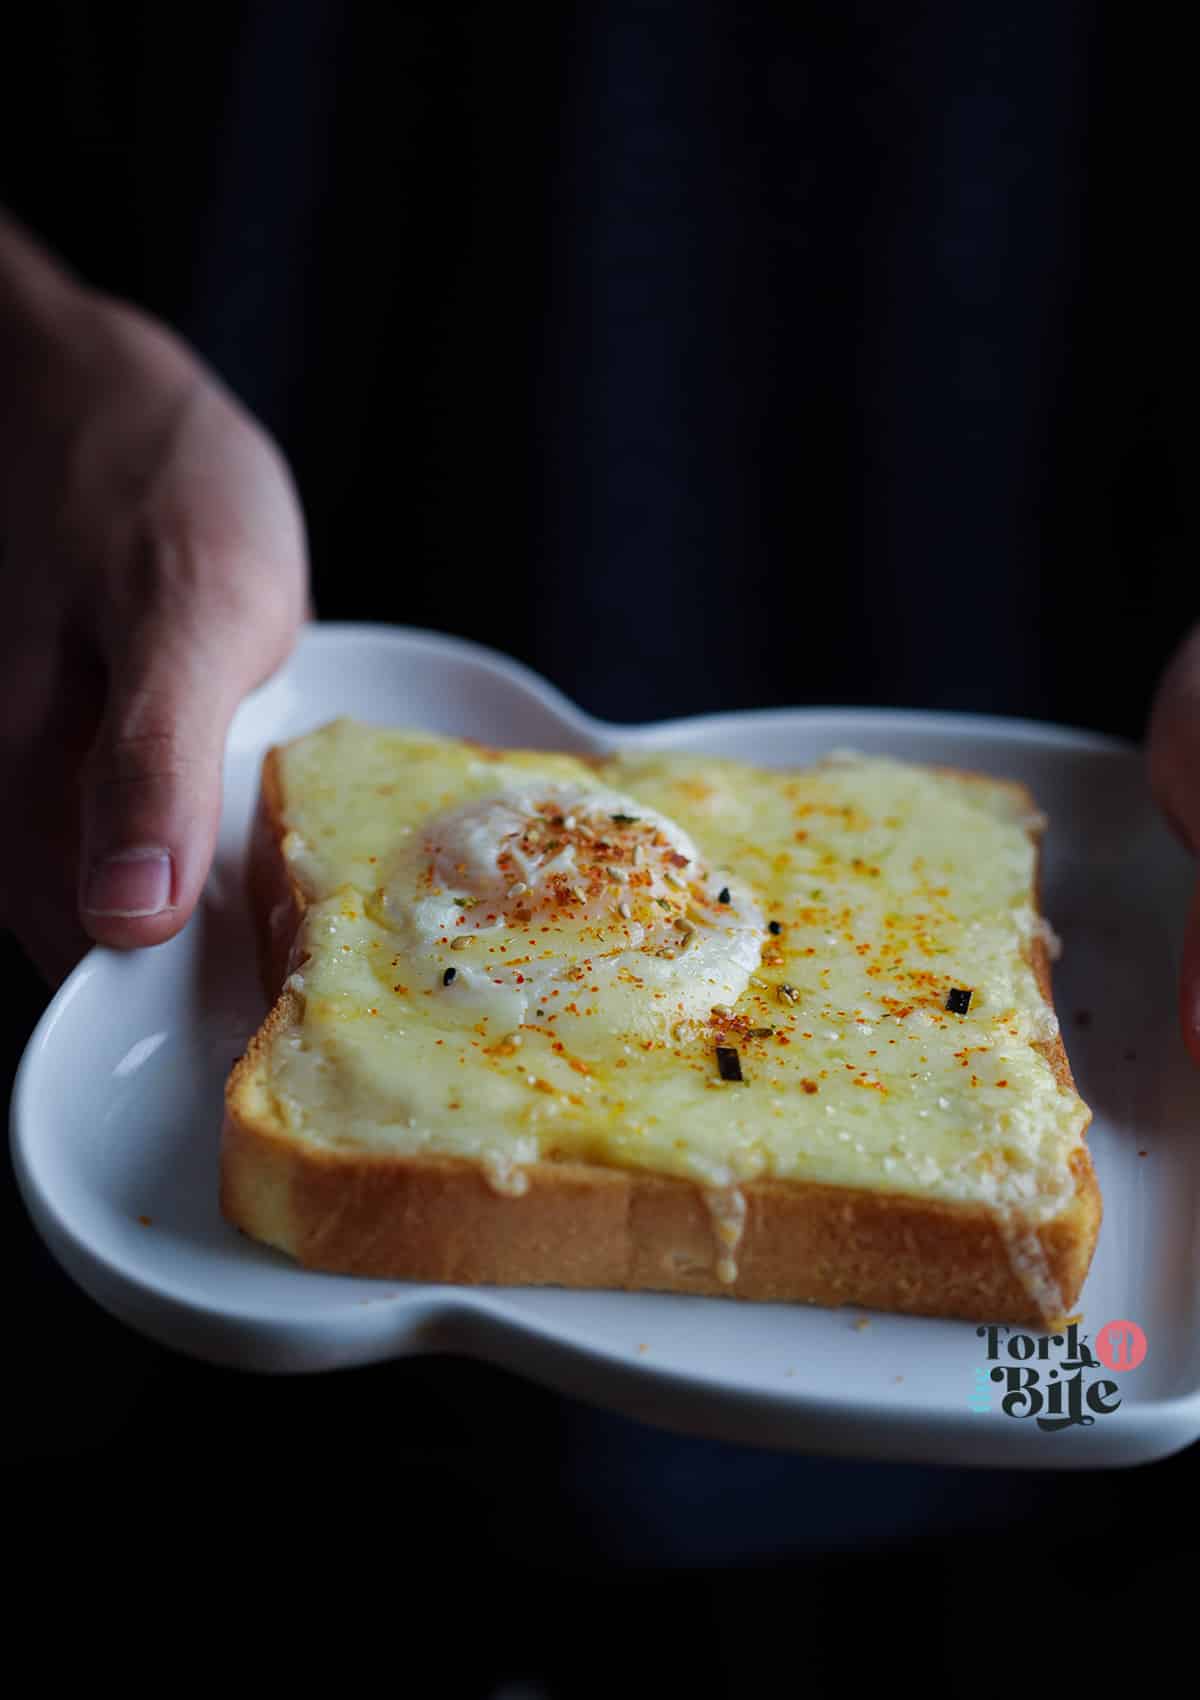 Eggs in a basket, also known as "toad in a hole," "egg in a hole," or "bird's nest," is a simple and delicious breakfast dish. Traditionally, it is made by cutting a hole in a slice of bread and frying an egg in the center.